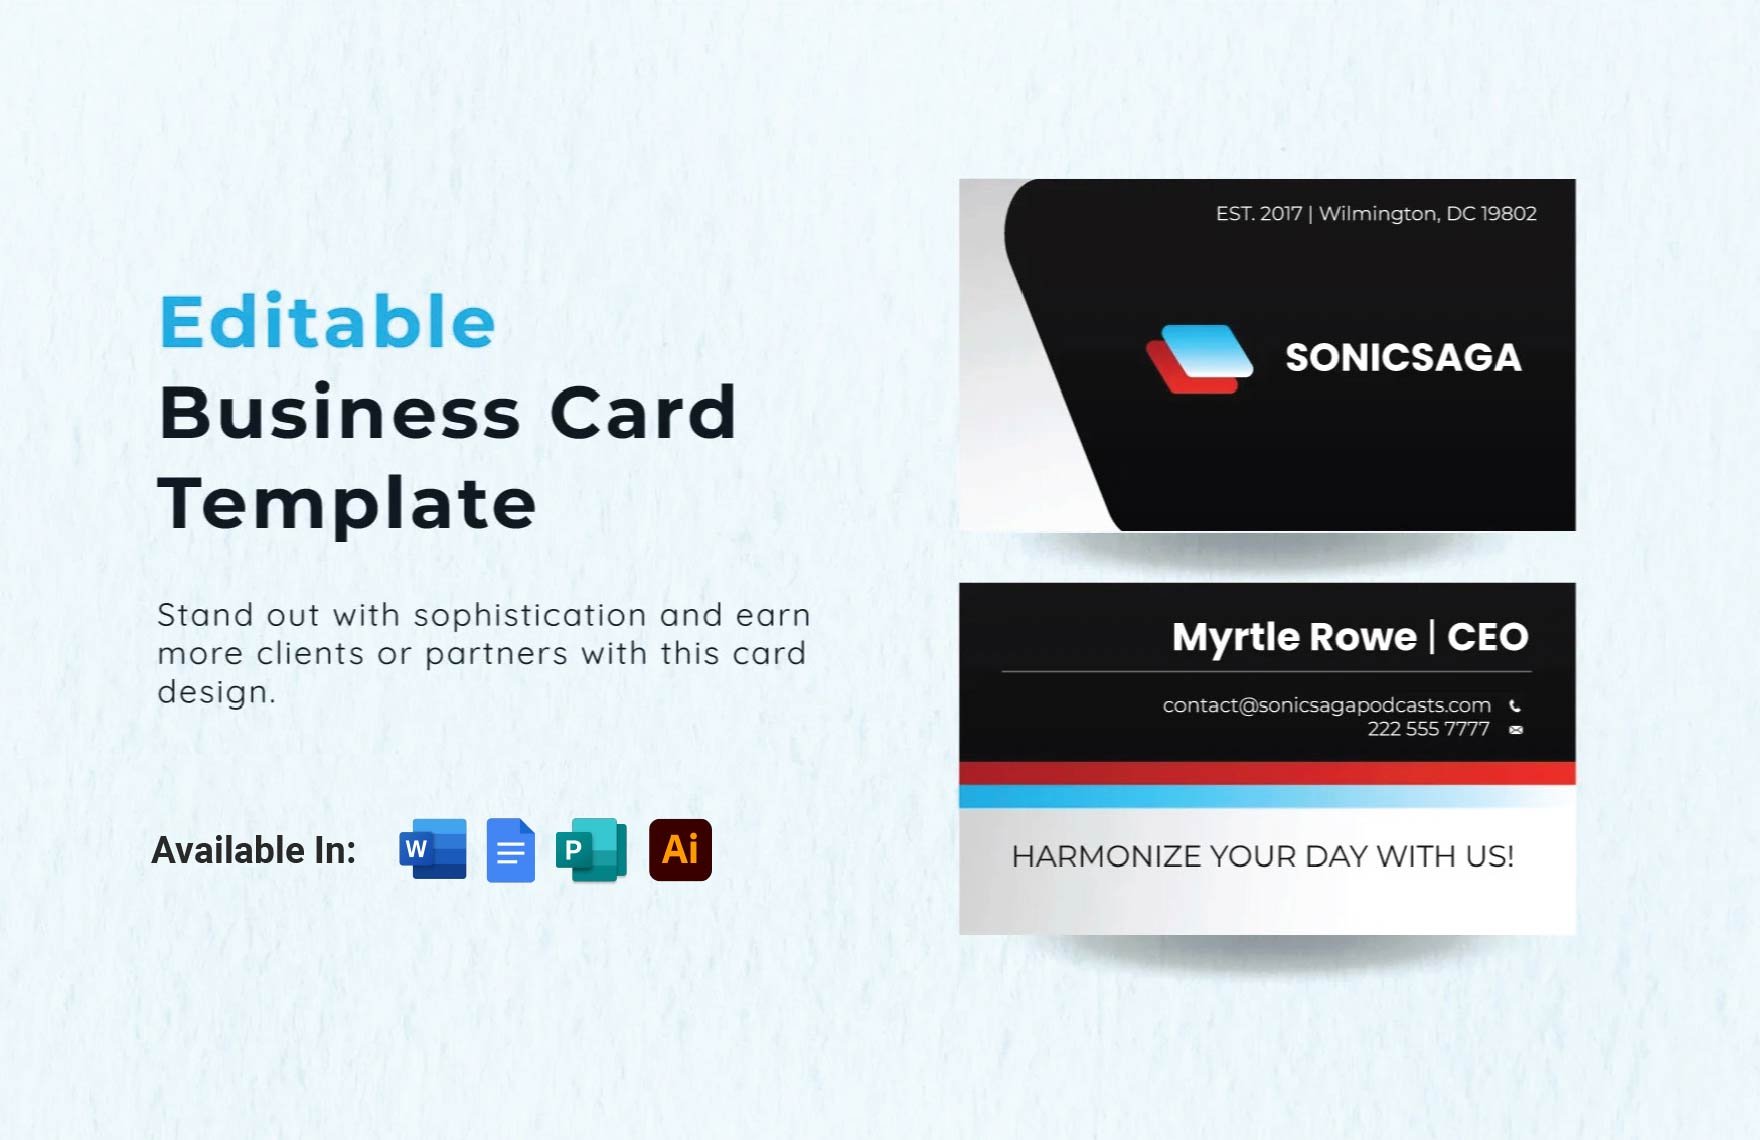 Editable Business Card Template in Word, Google Docs, Illustrator, Publisher, InDesign